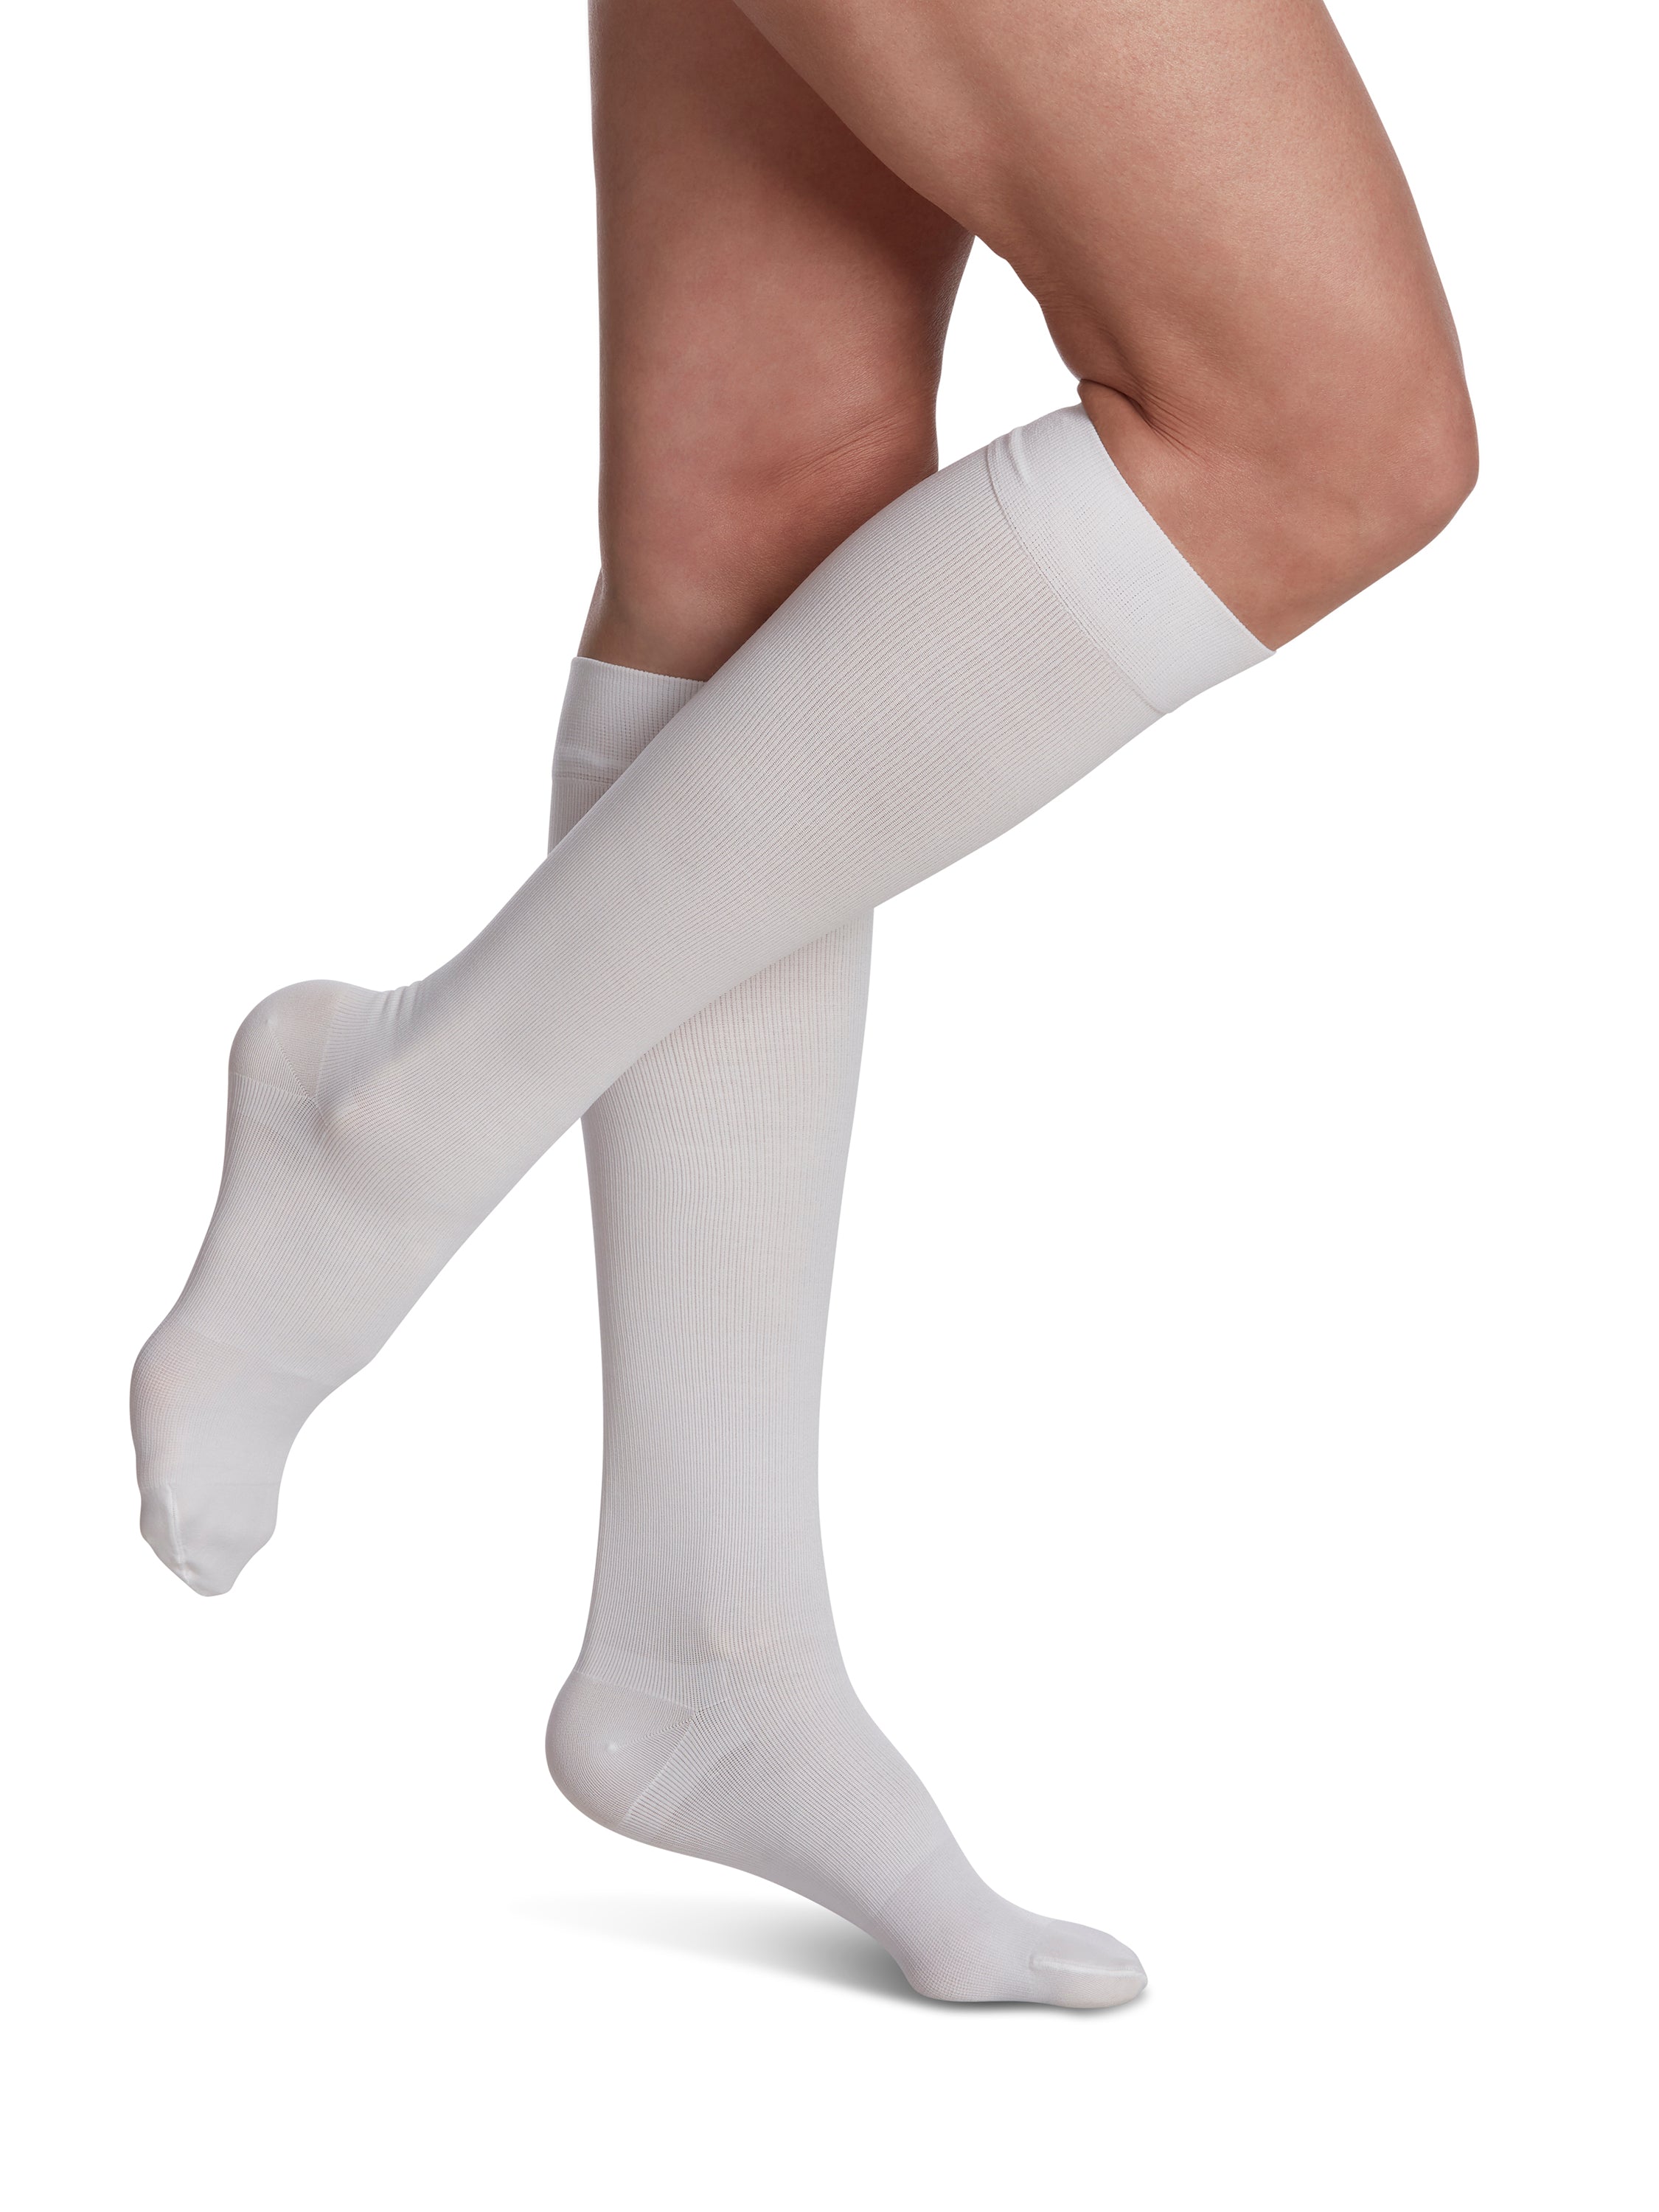 Woman wearing Sigvaris Essential Cotton compression knee-highs in the color White